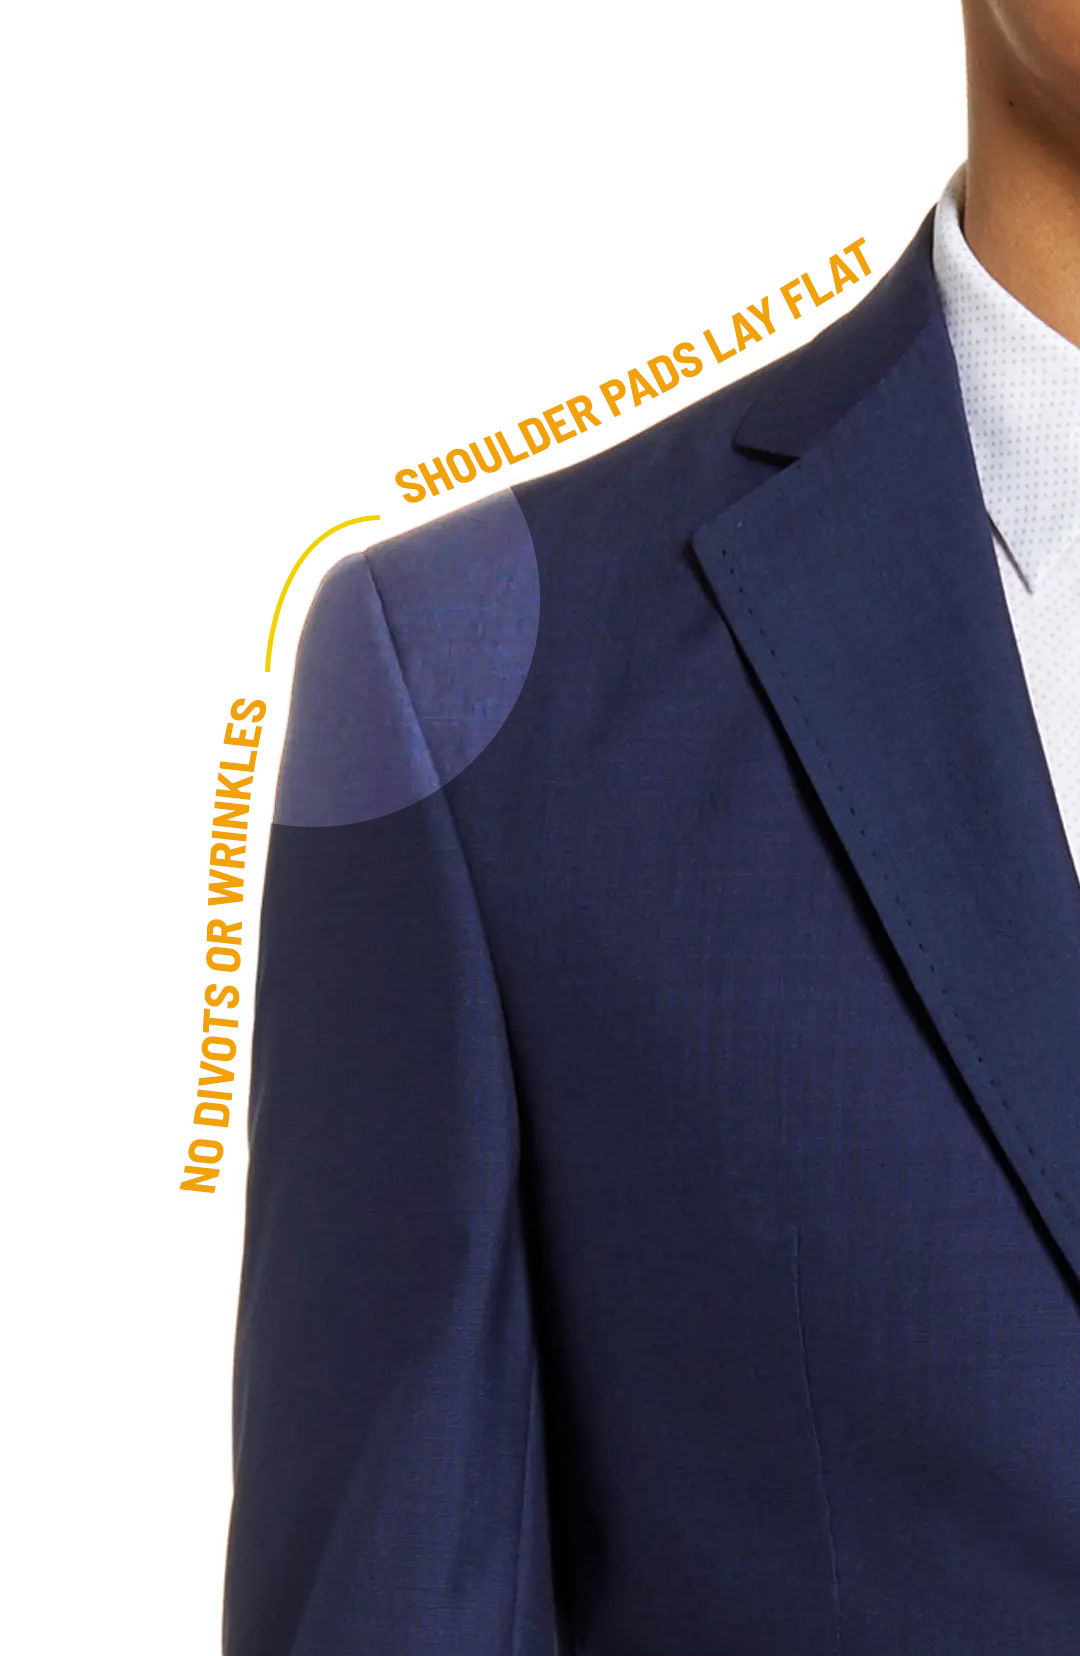 A suit that fits well with flat suit jacket shoulders with no shoulder divots or wrinkles